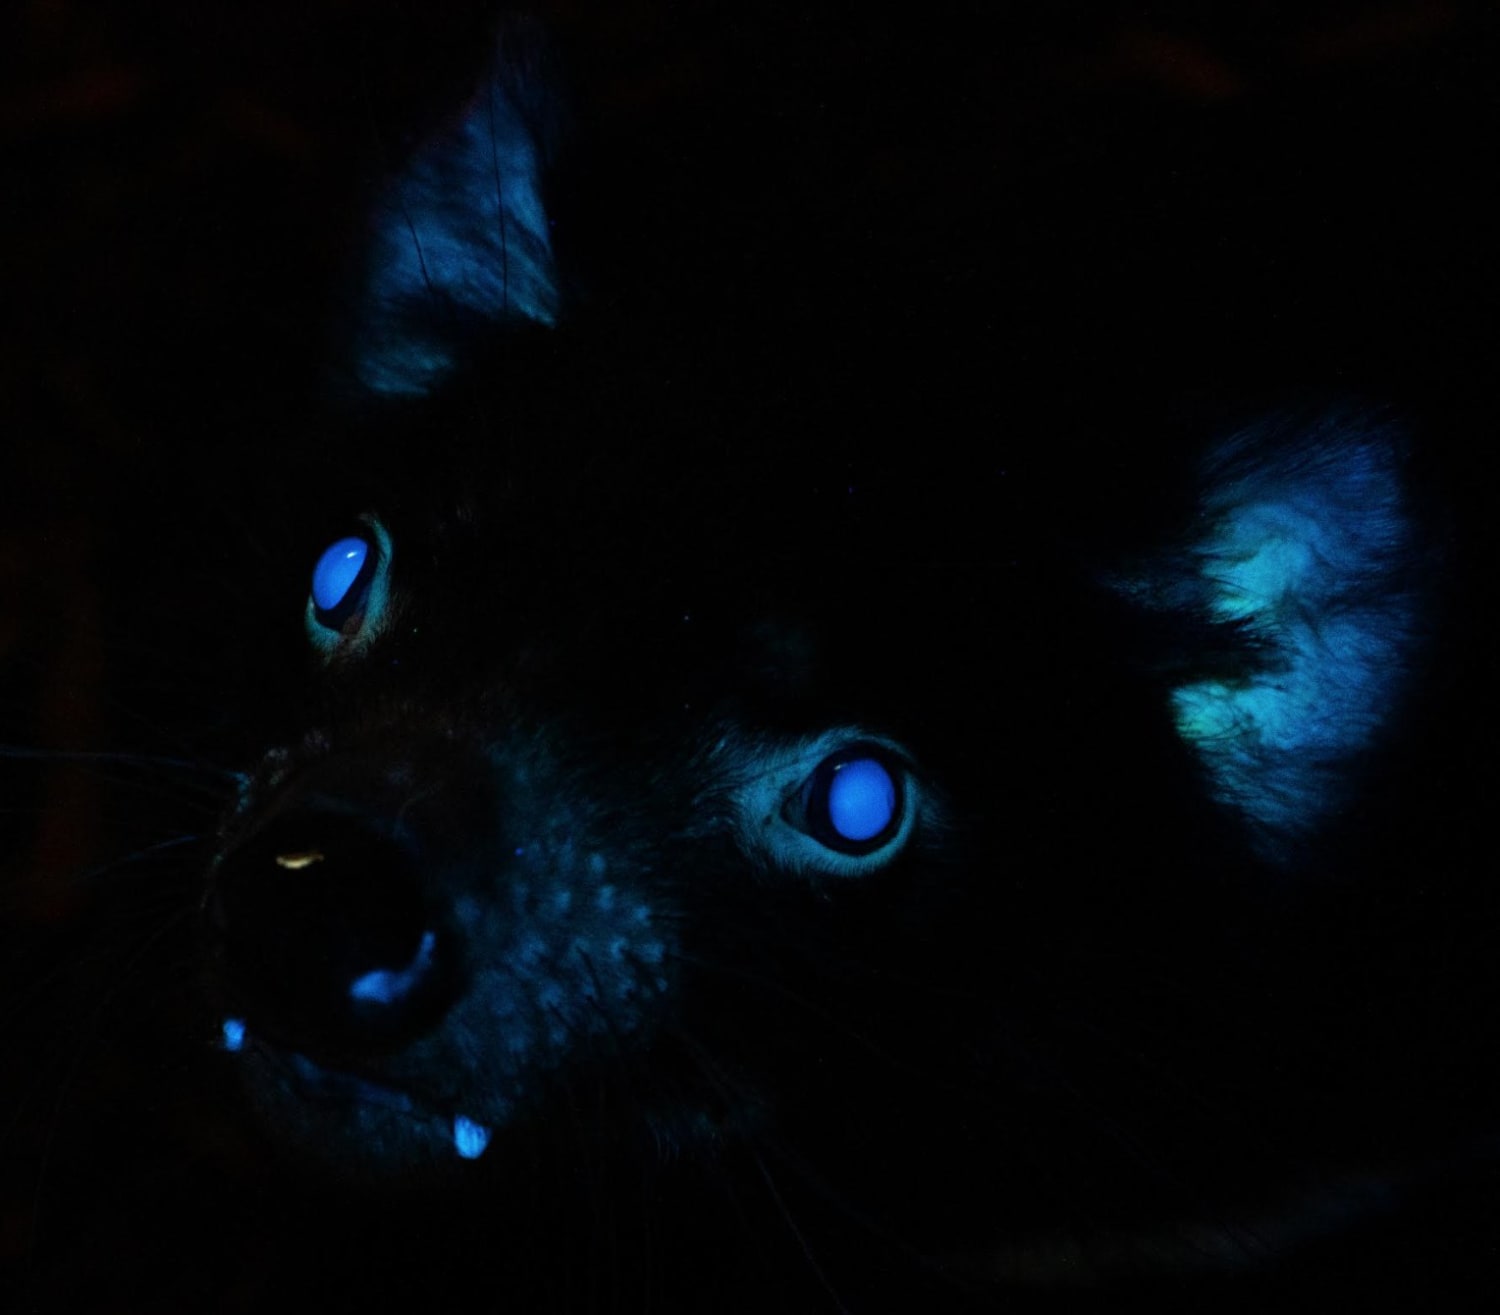 The first ever documented case of biofluorescence in Tasmanian devils was captured tonight at the Toledo Zoo.